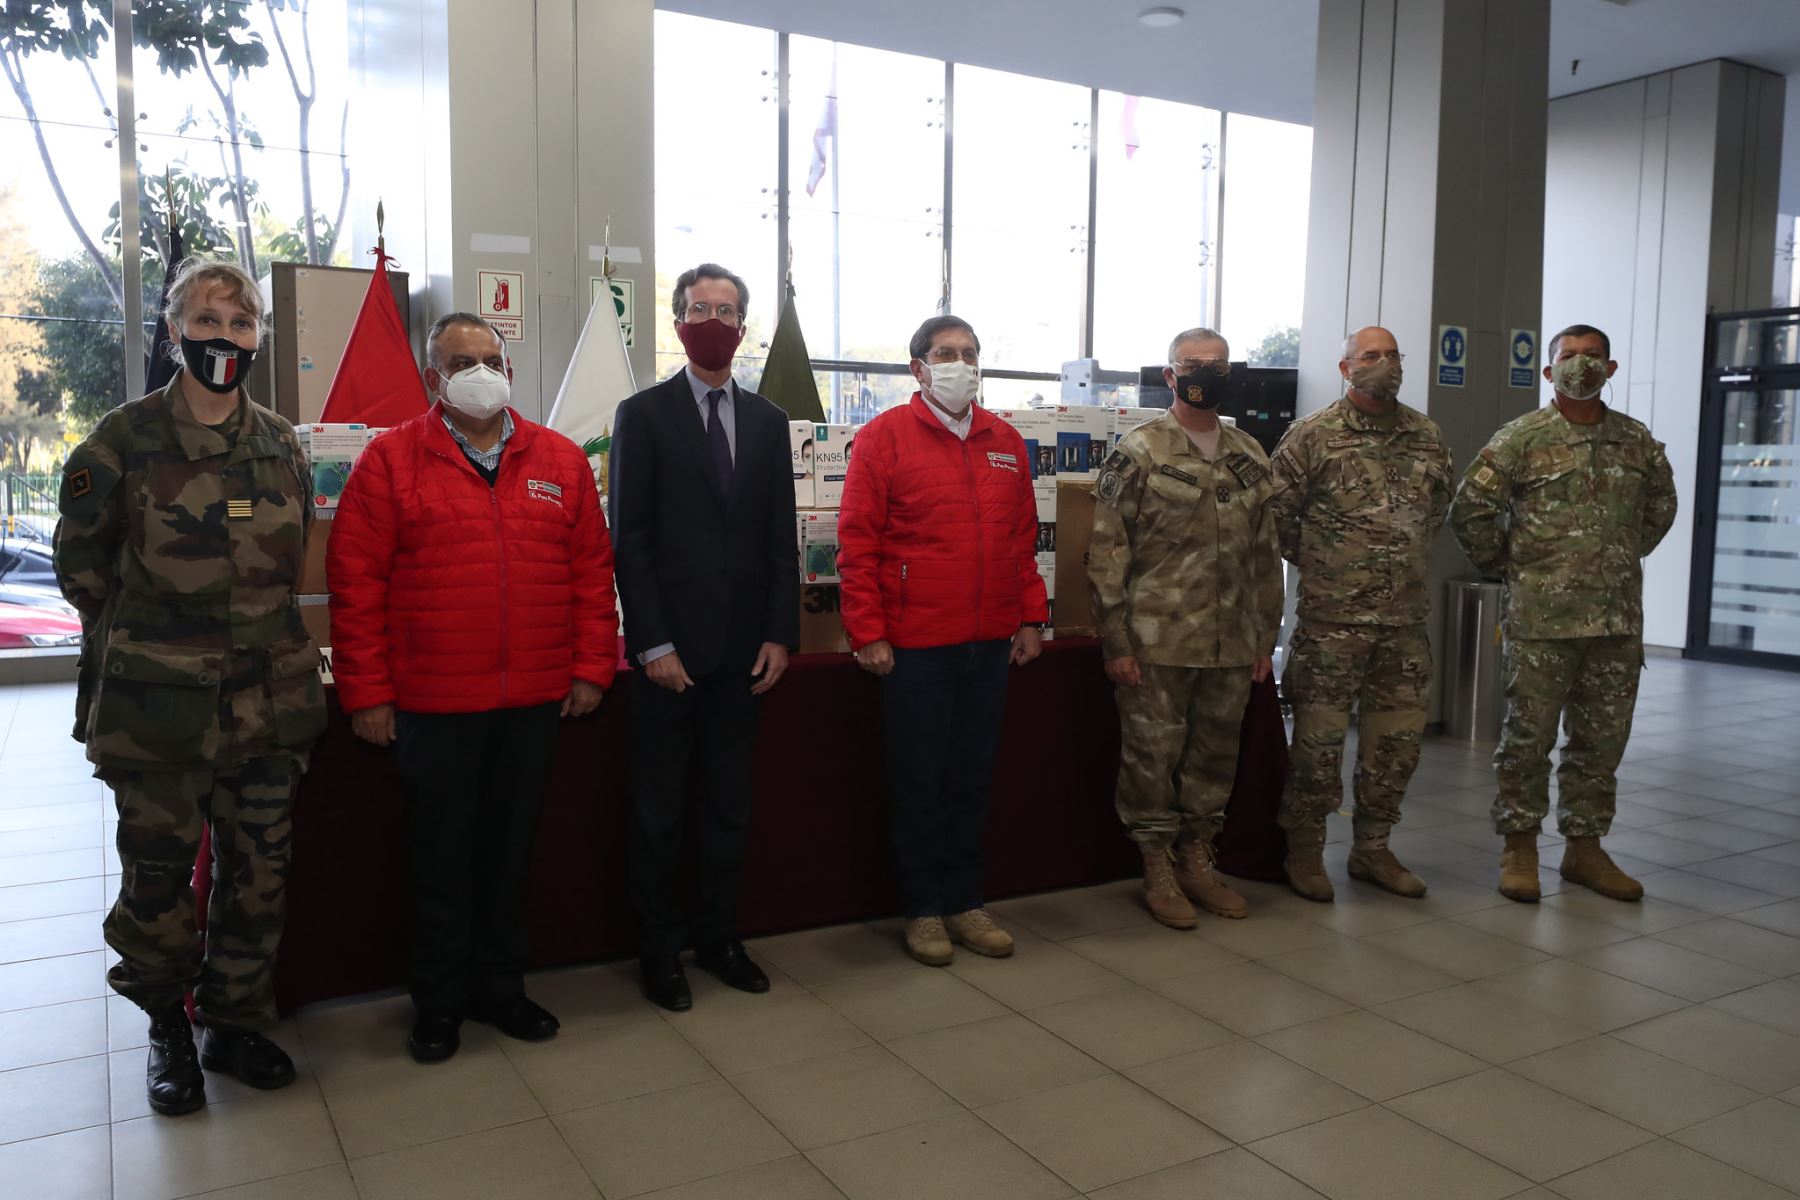 The Ministry of Defense receives an important batch of personal protective equipment from the French Embassy in Peru to fight the COVID-19 pandemic.